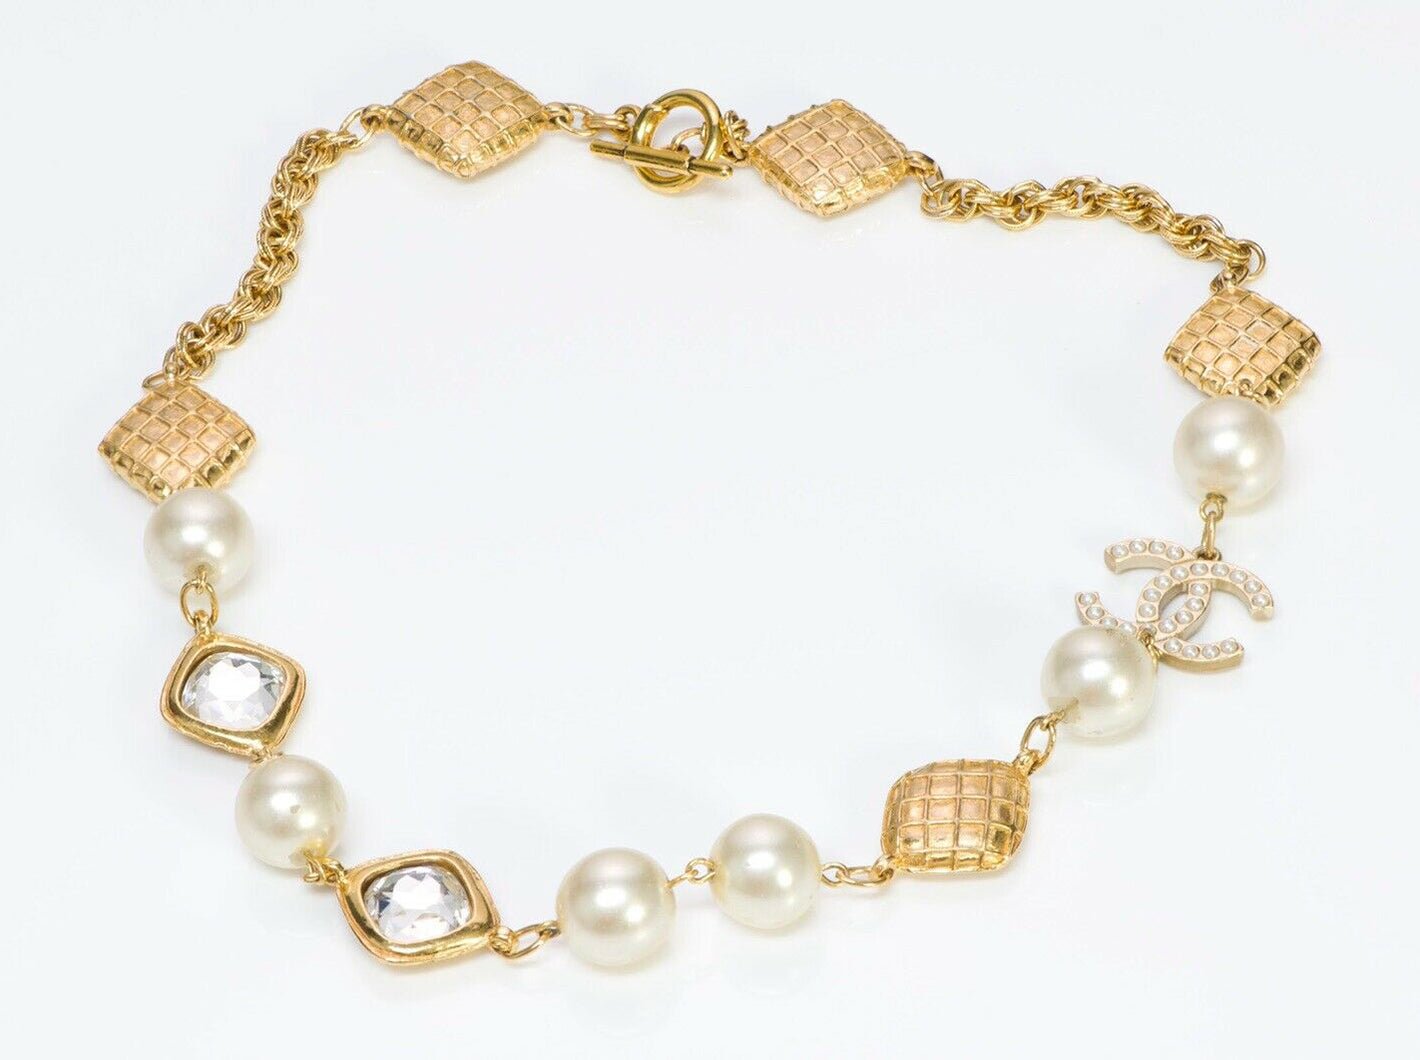 Vintage CHANEL CC 1970’s Quilted Pearl Crystal Chain Collar Necklace